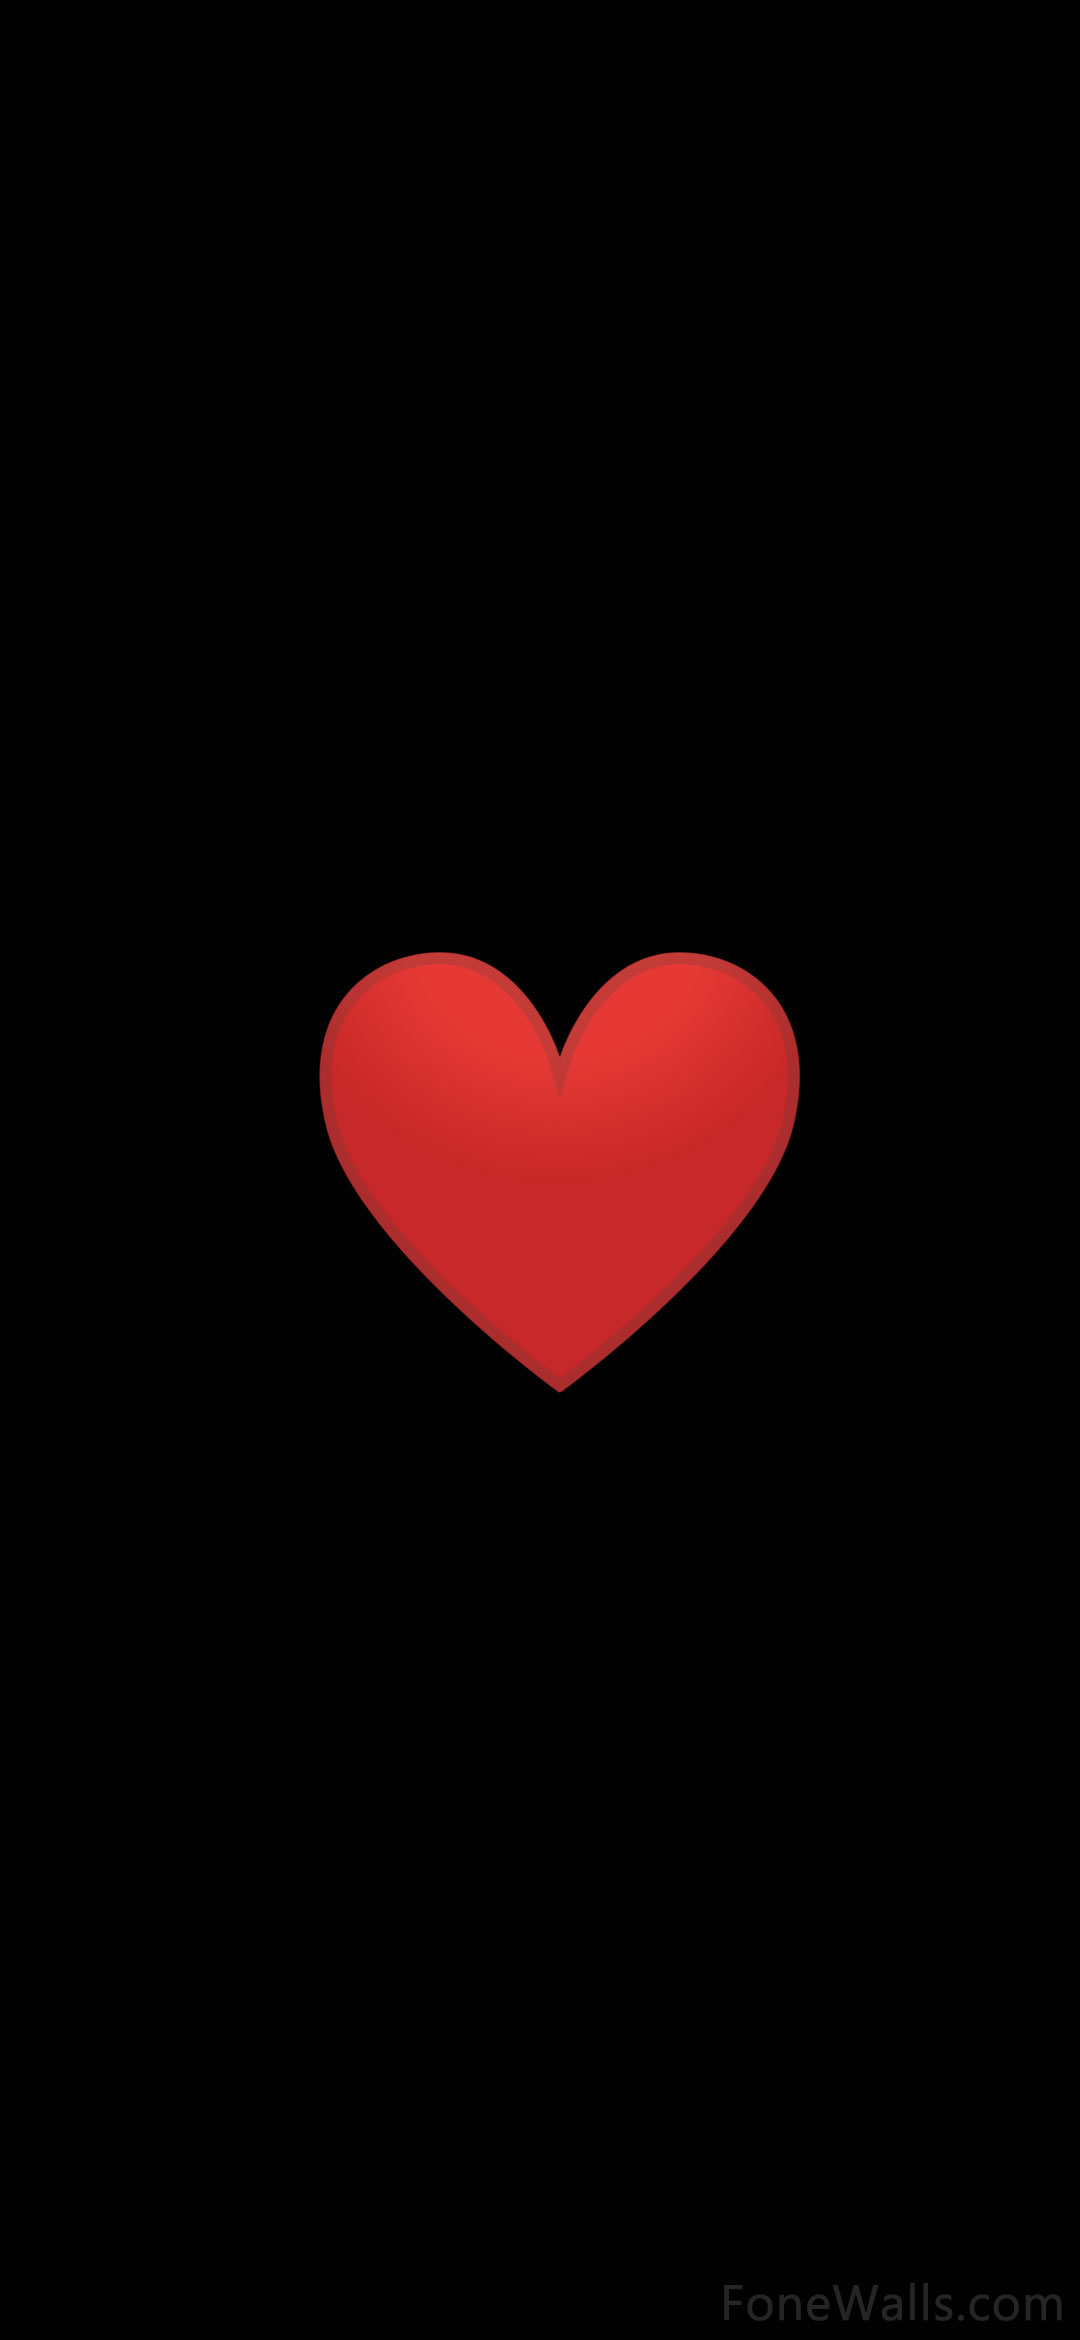 Red Heart Wallpaper 1080x2340 – S - Chill-out Wallpapers